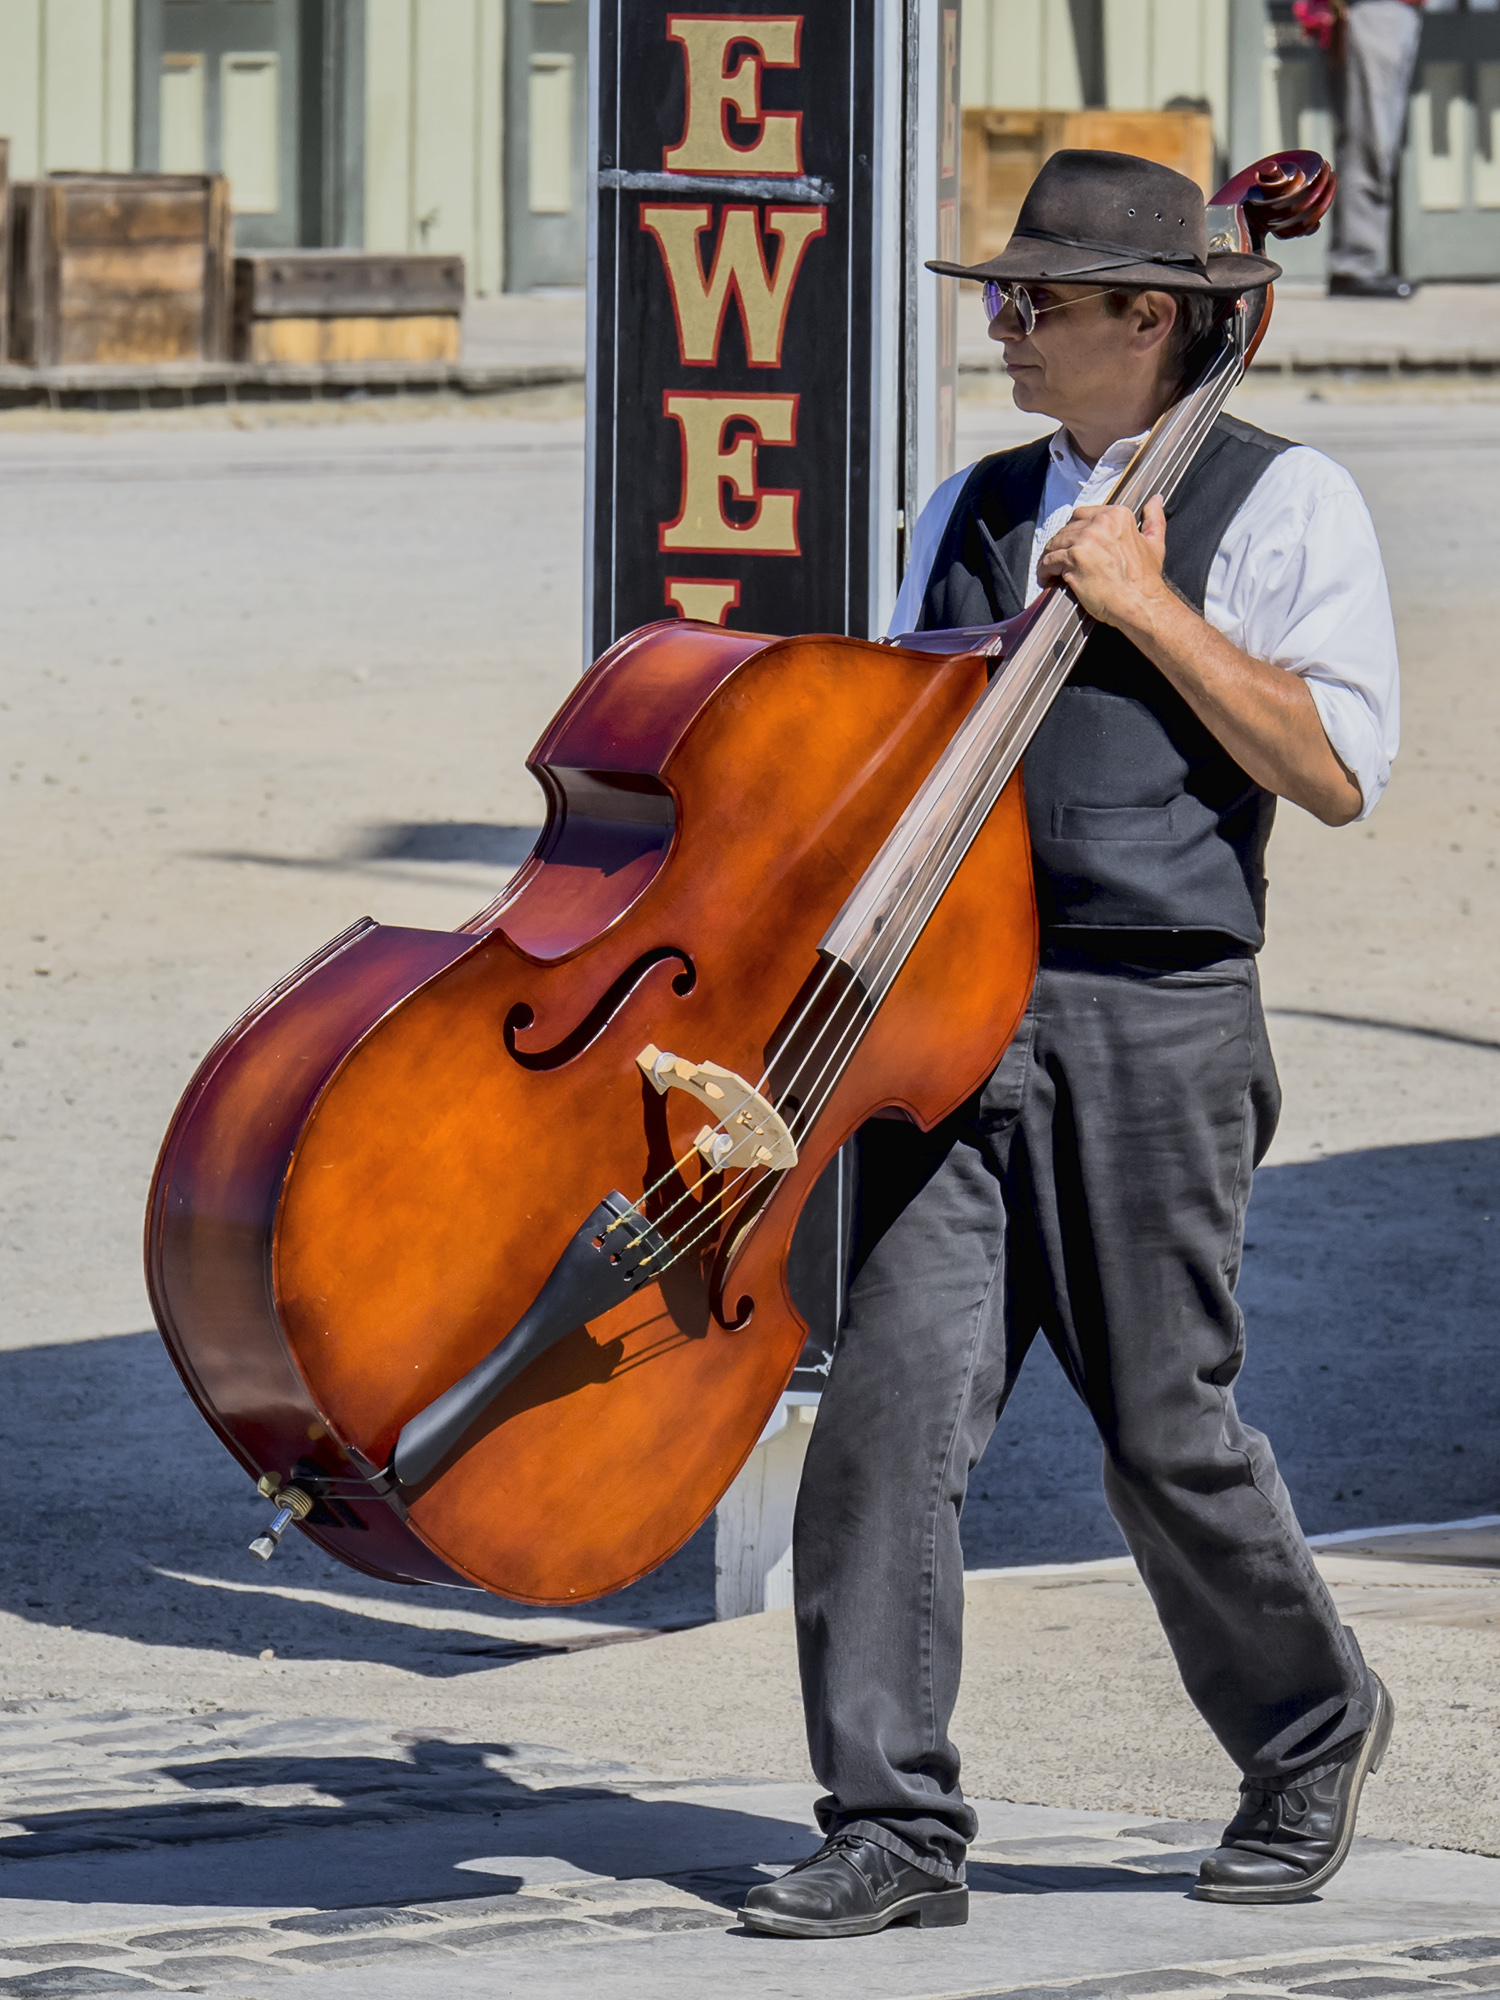 Old Town: The Bass Player